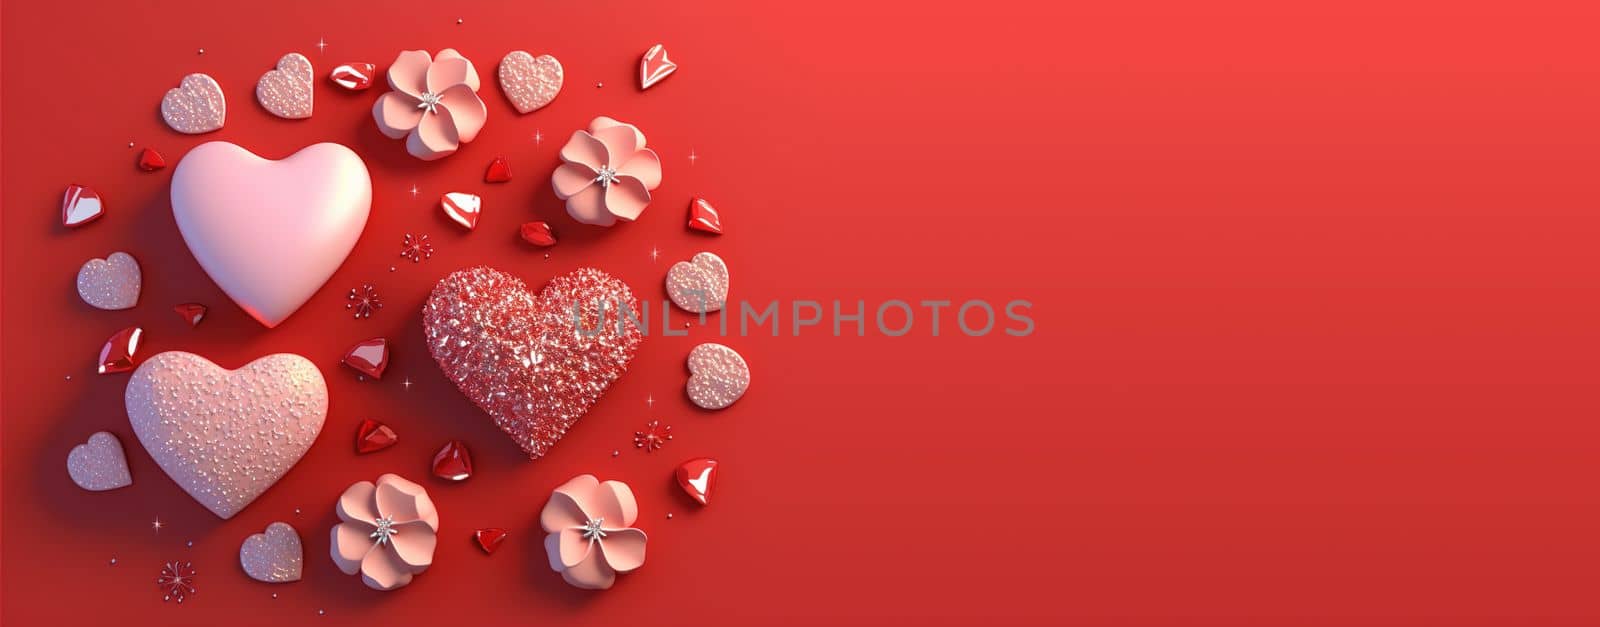 Valentine's Day 3D Heart Crystal Diamond Illustration for Banner and Background by templator